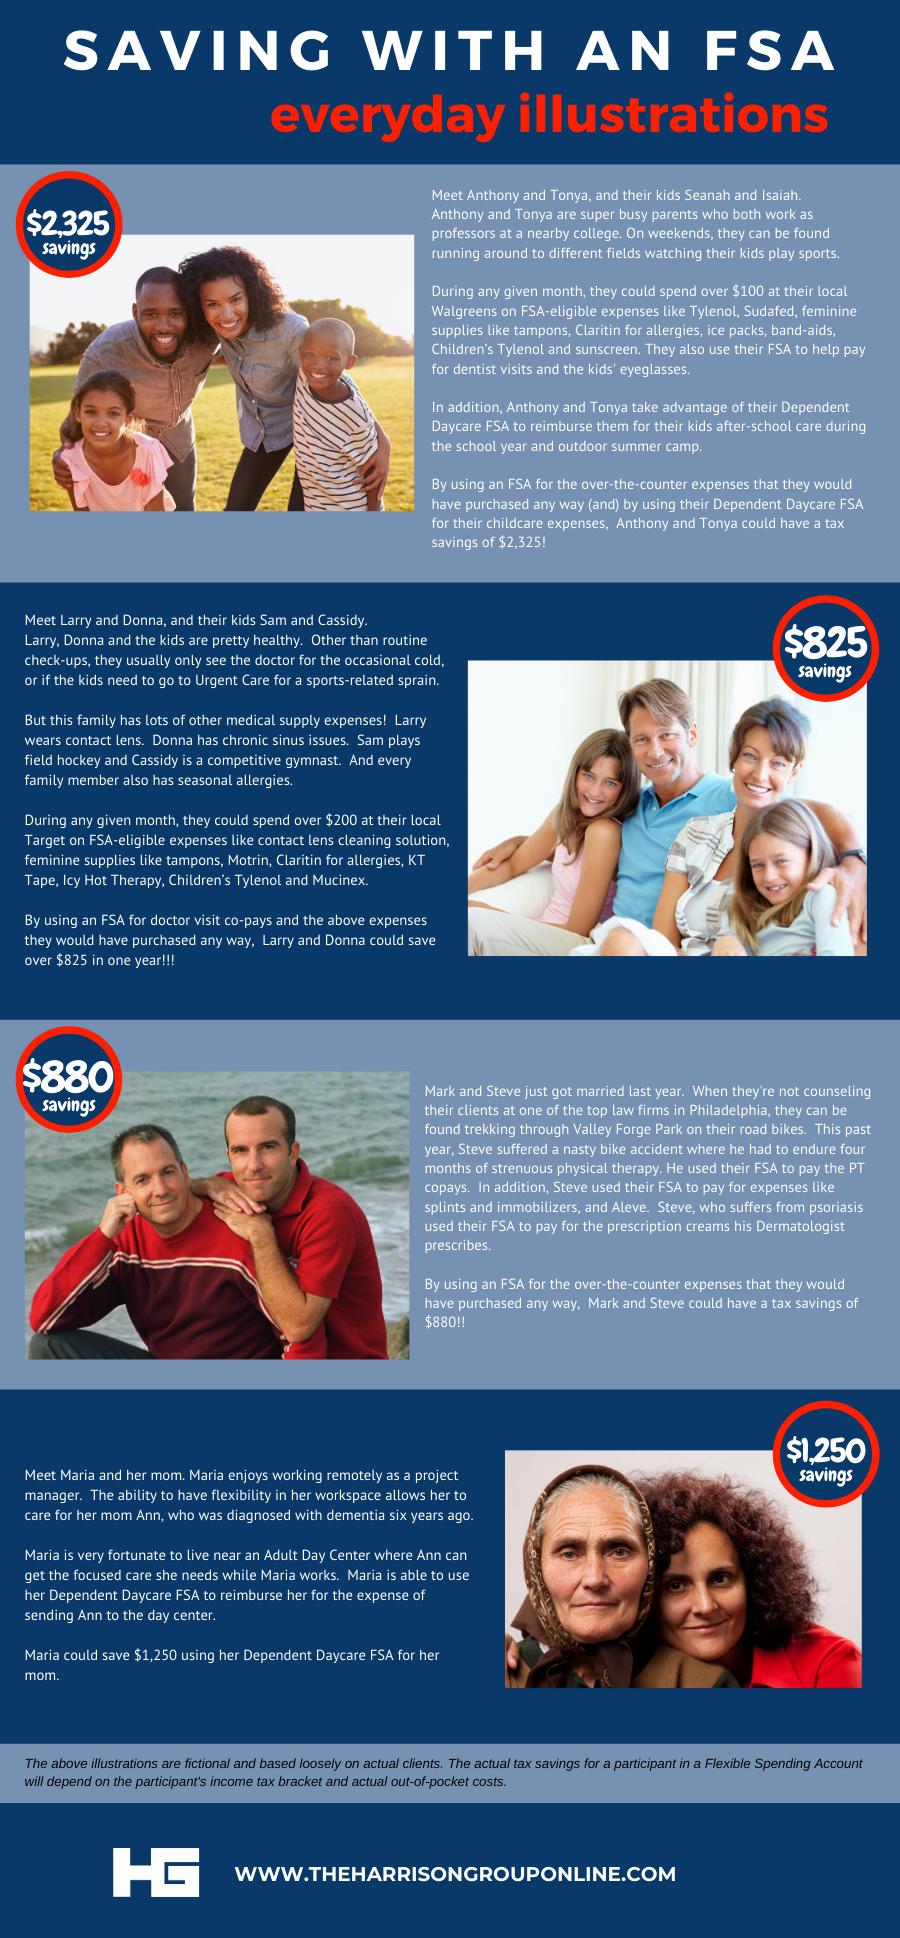 https://www.theharrisongrouponline.com/wp-content/uploads/2020/11/Saving-with-an-FSA-Family-illustrations-final.png